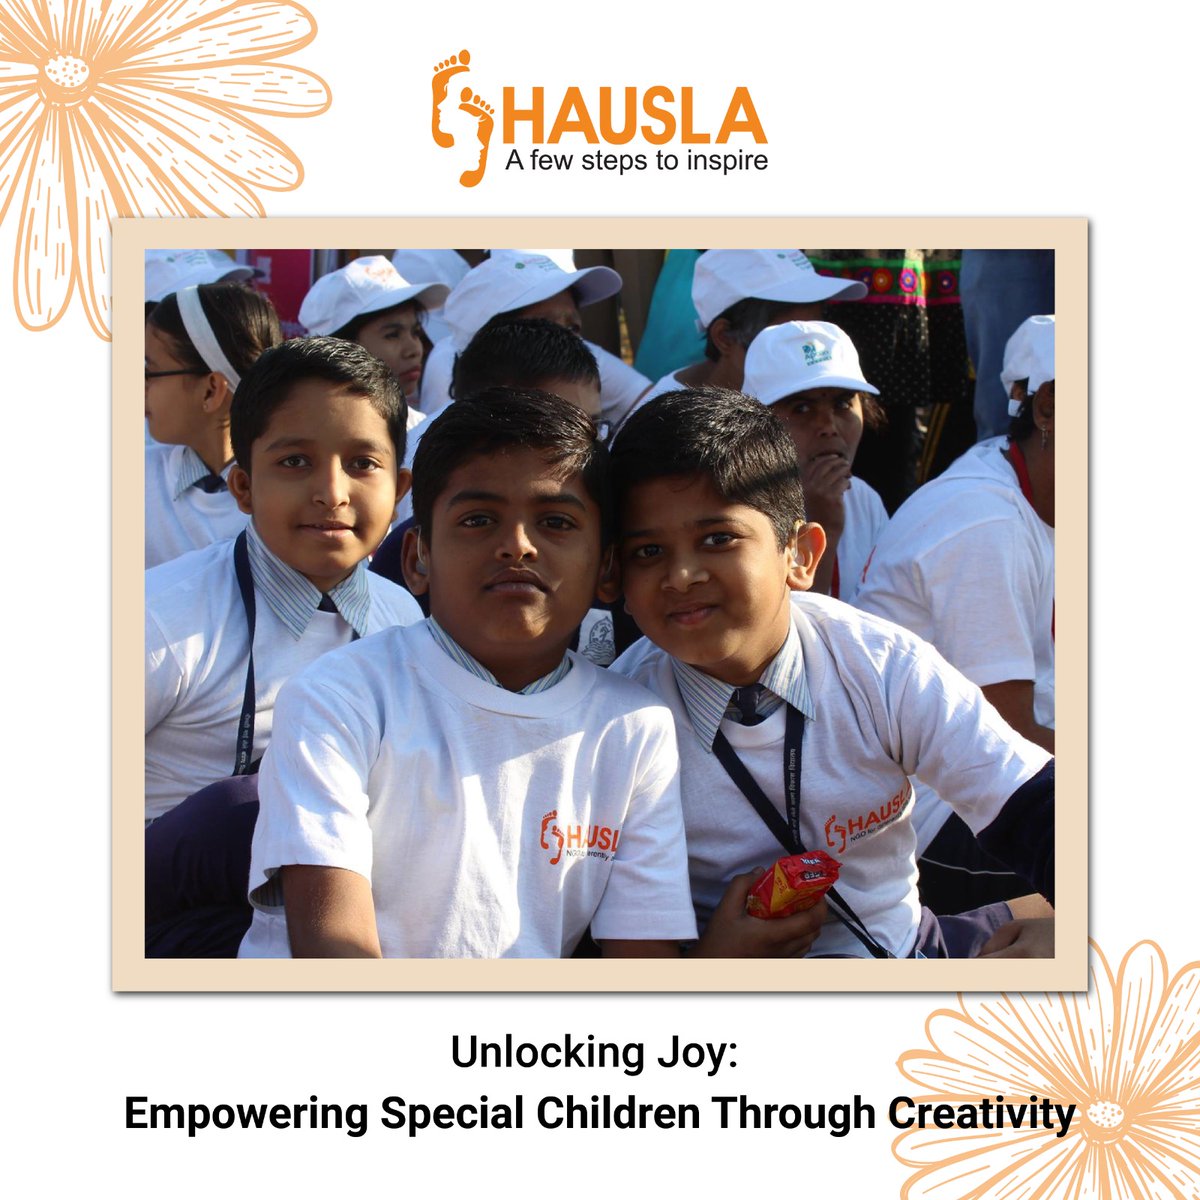 In times of crisis and natural disasters, hope becomes our guiding light. Together, we can make a difference and bring relief to those affected.

#hauslafoundation #specialkids #ngoindia #nashikngo #support #supportspecialkids #donatetoday #donate